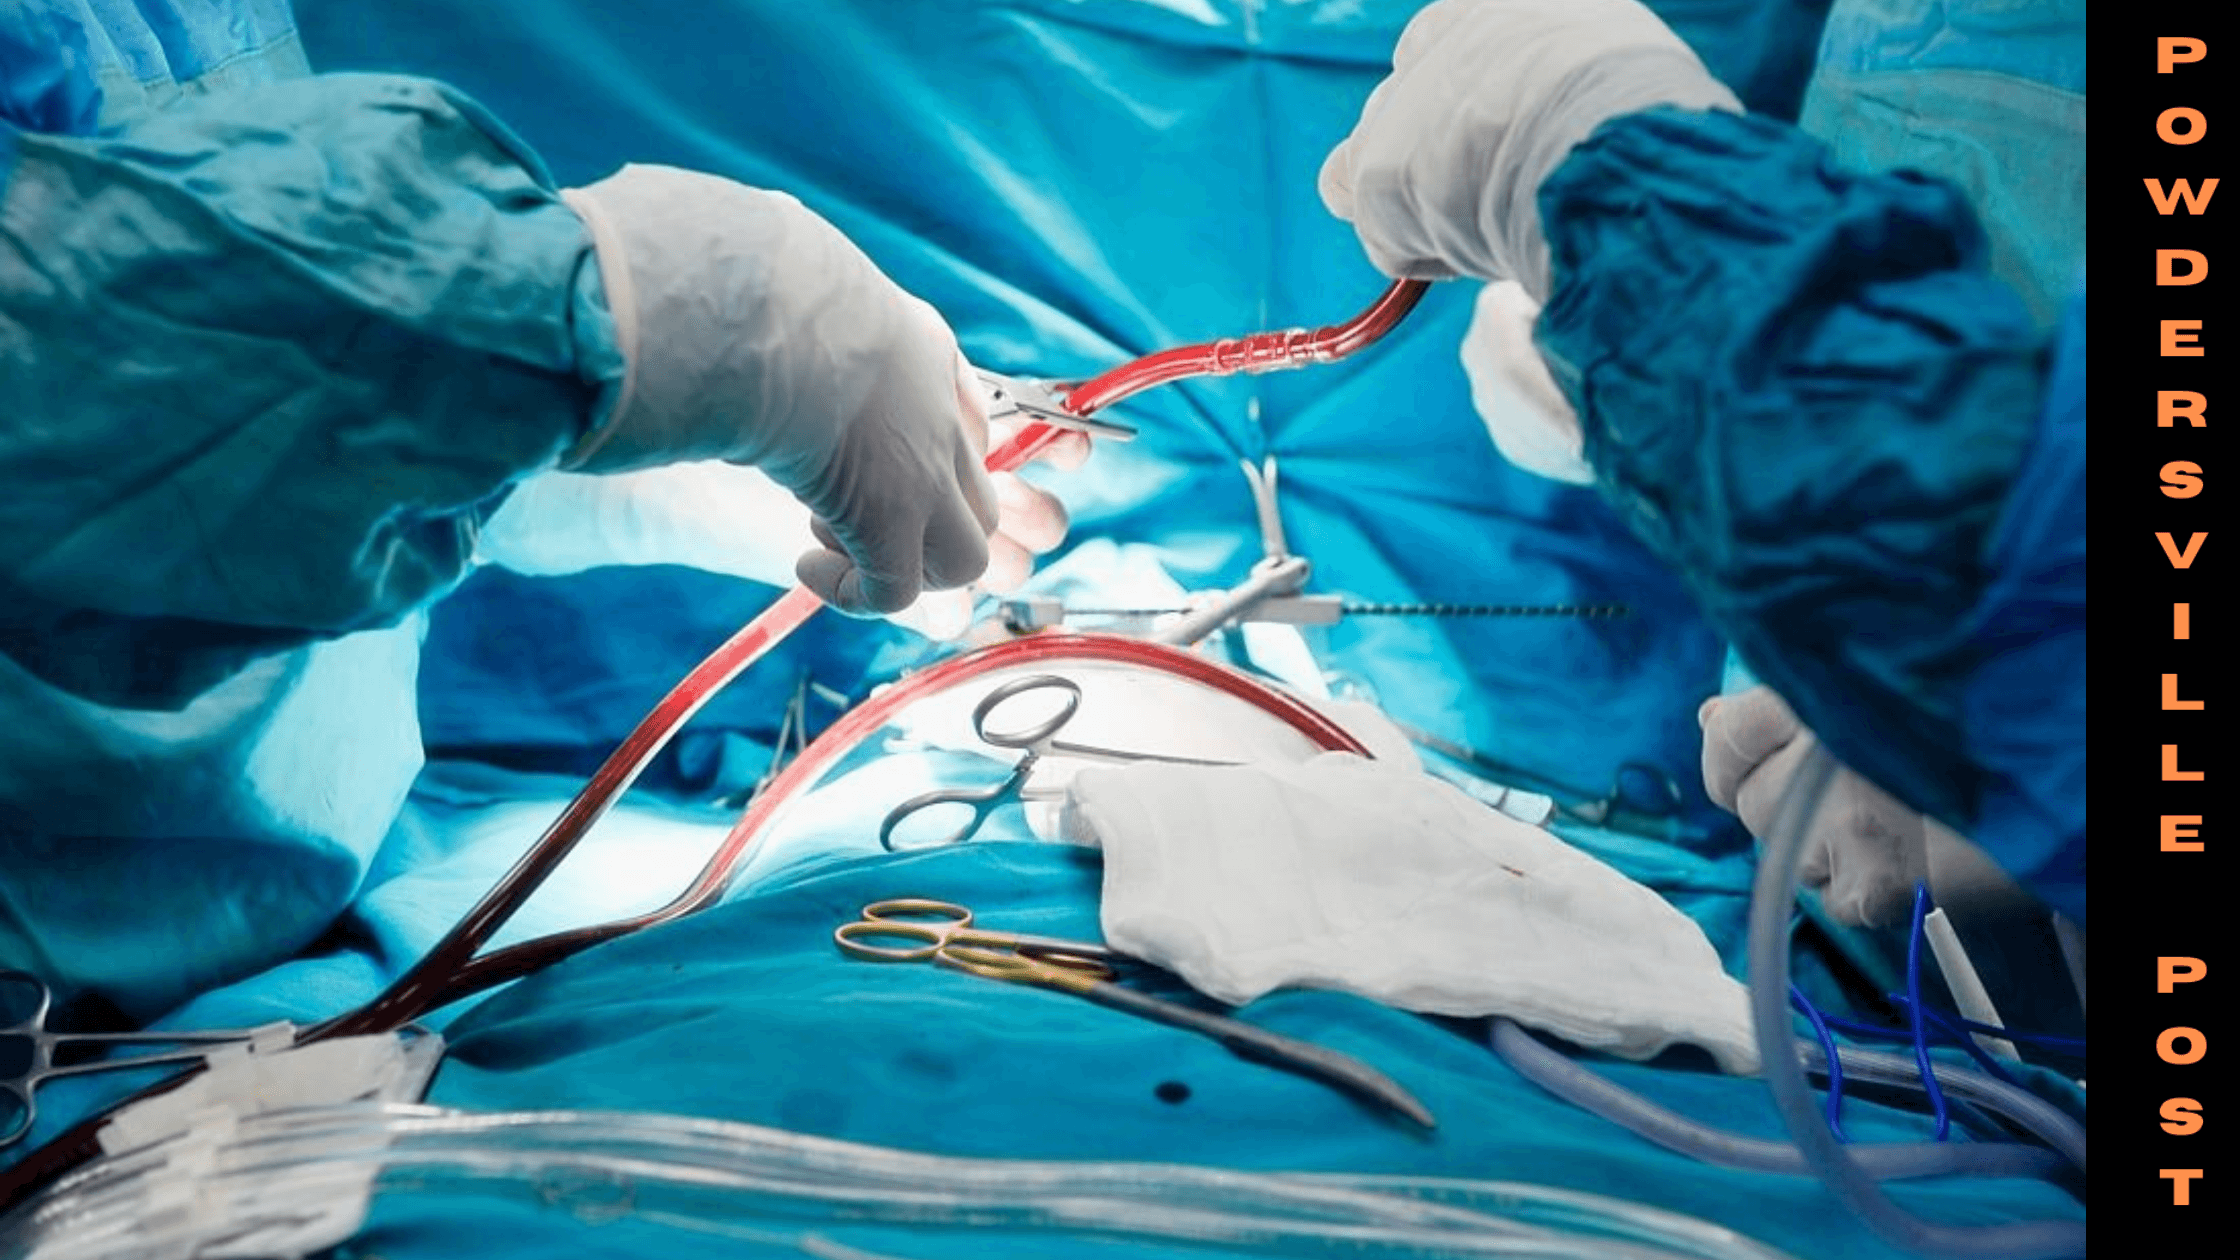 Patients With Mitral Valve Prolapse Can Avoid Fibrosis Through Surgery